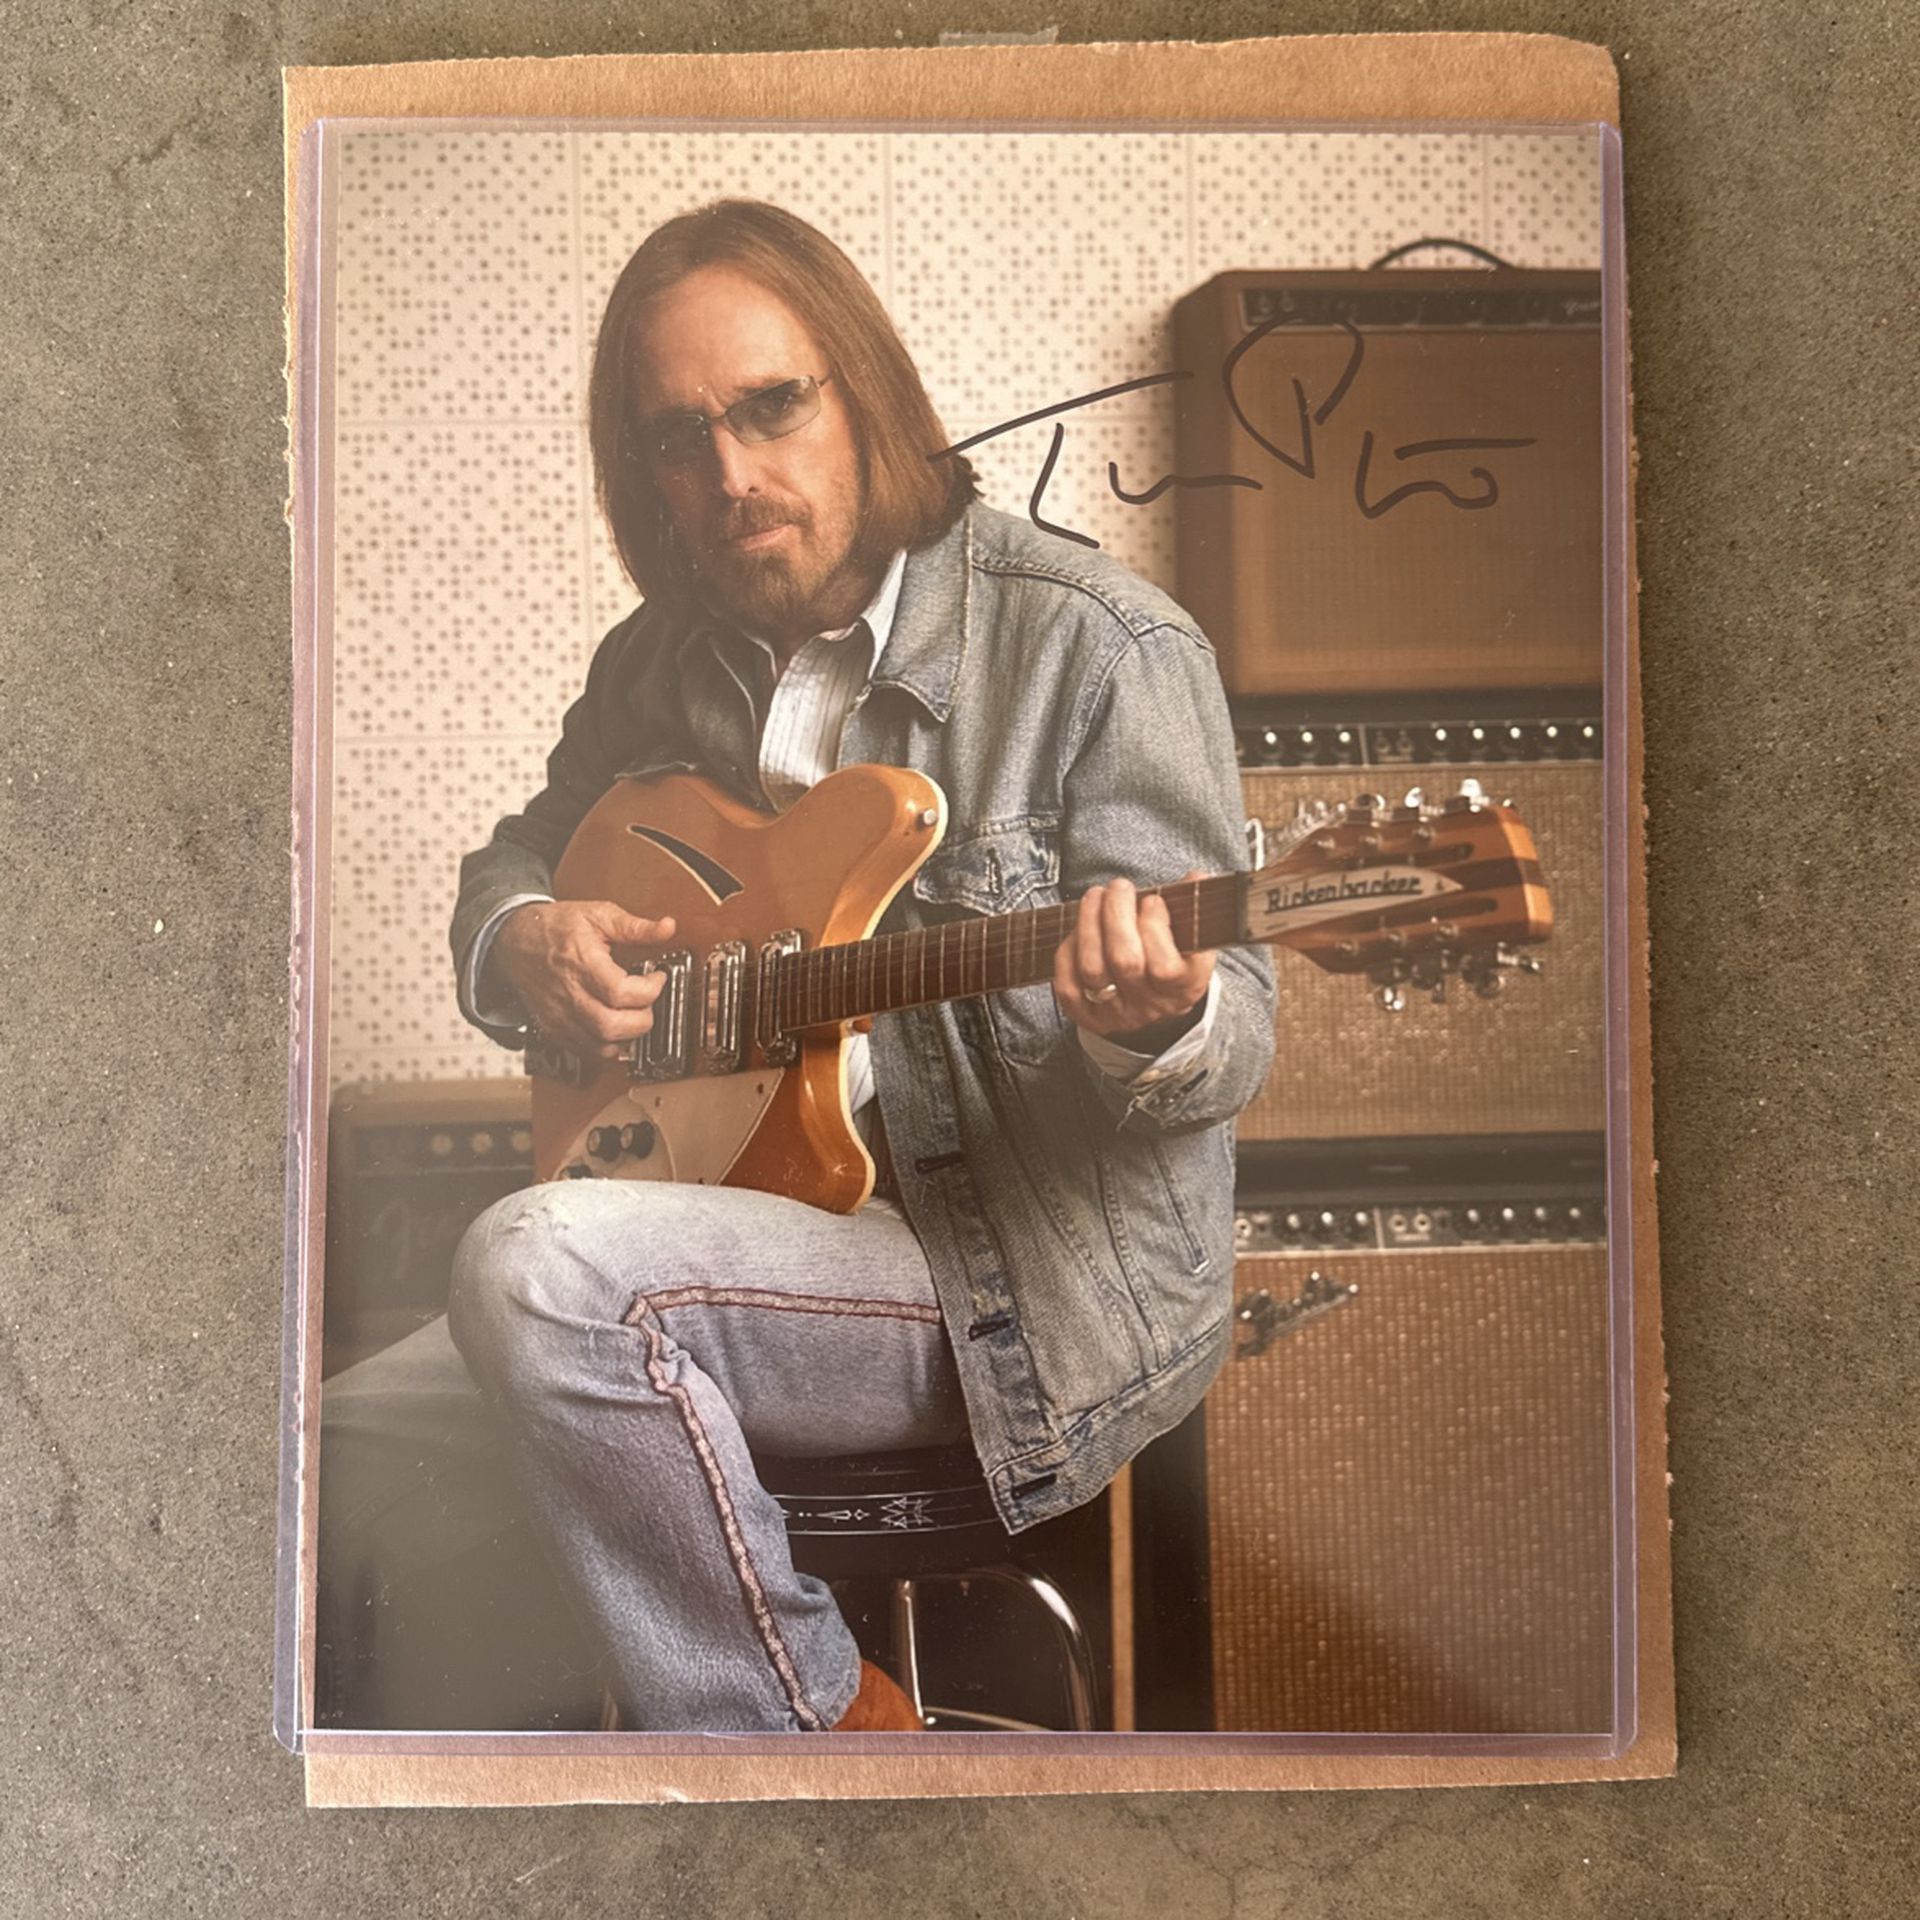 Signed Tom petty Photograph With Certificate Of Authenticity